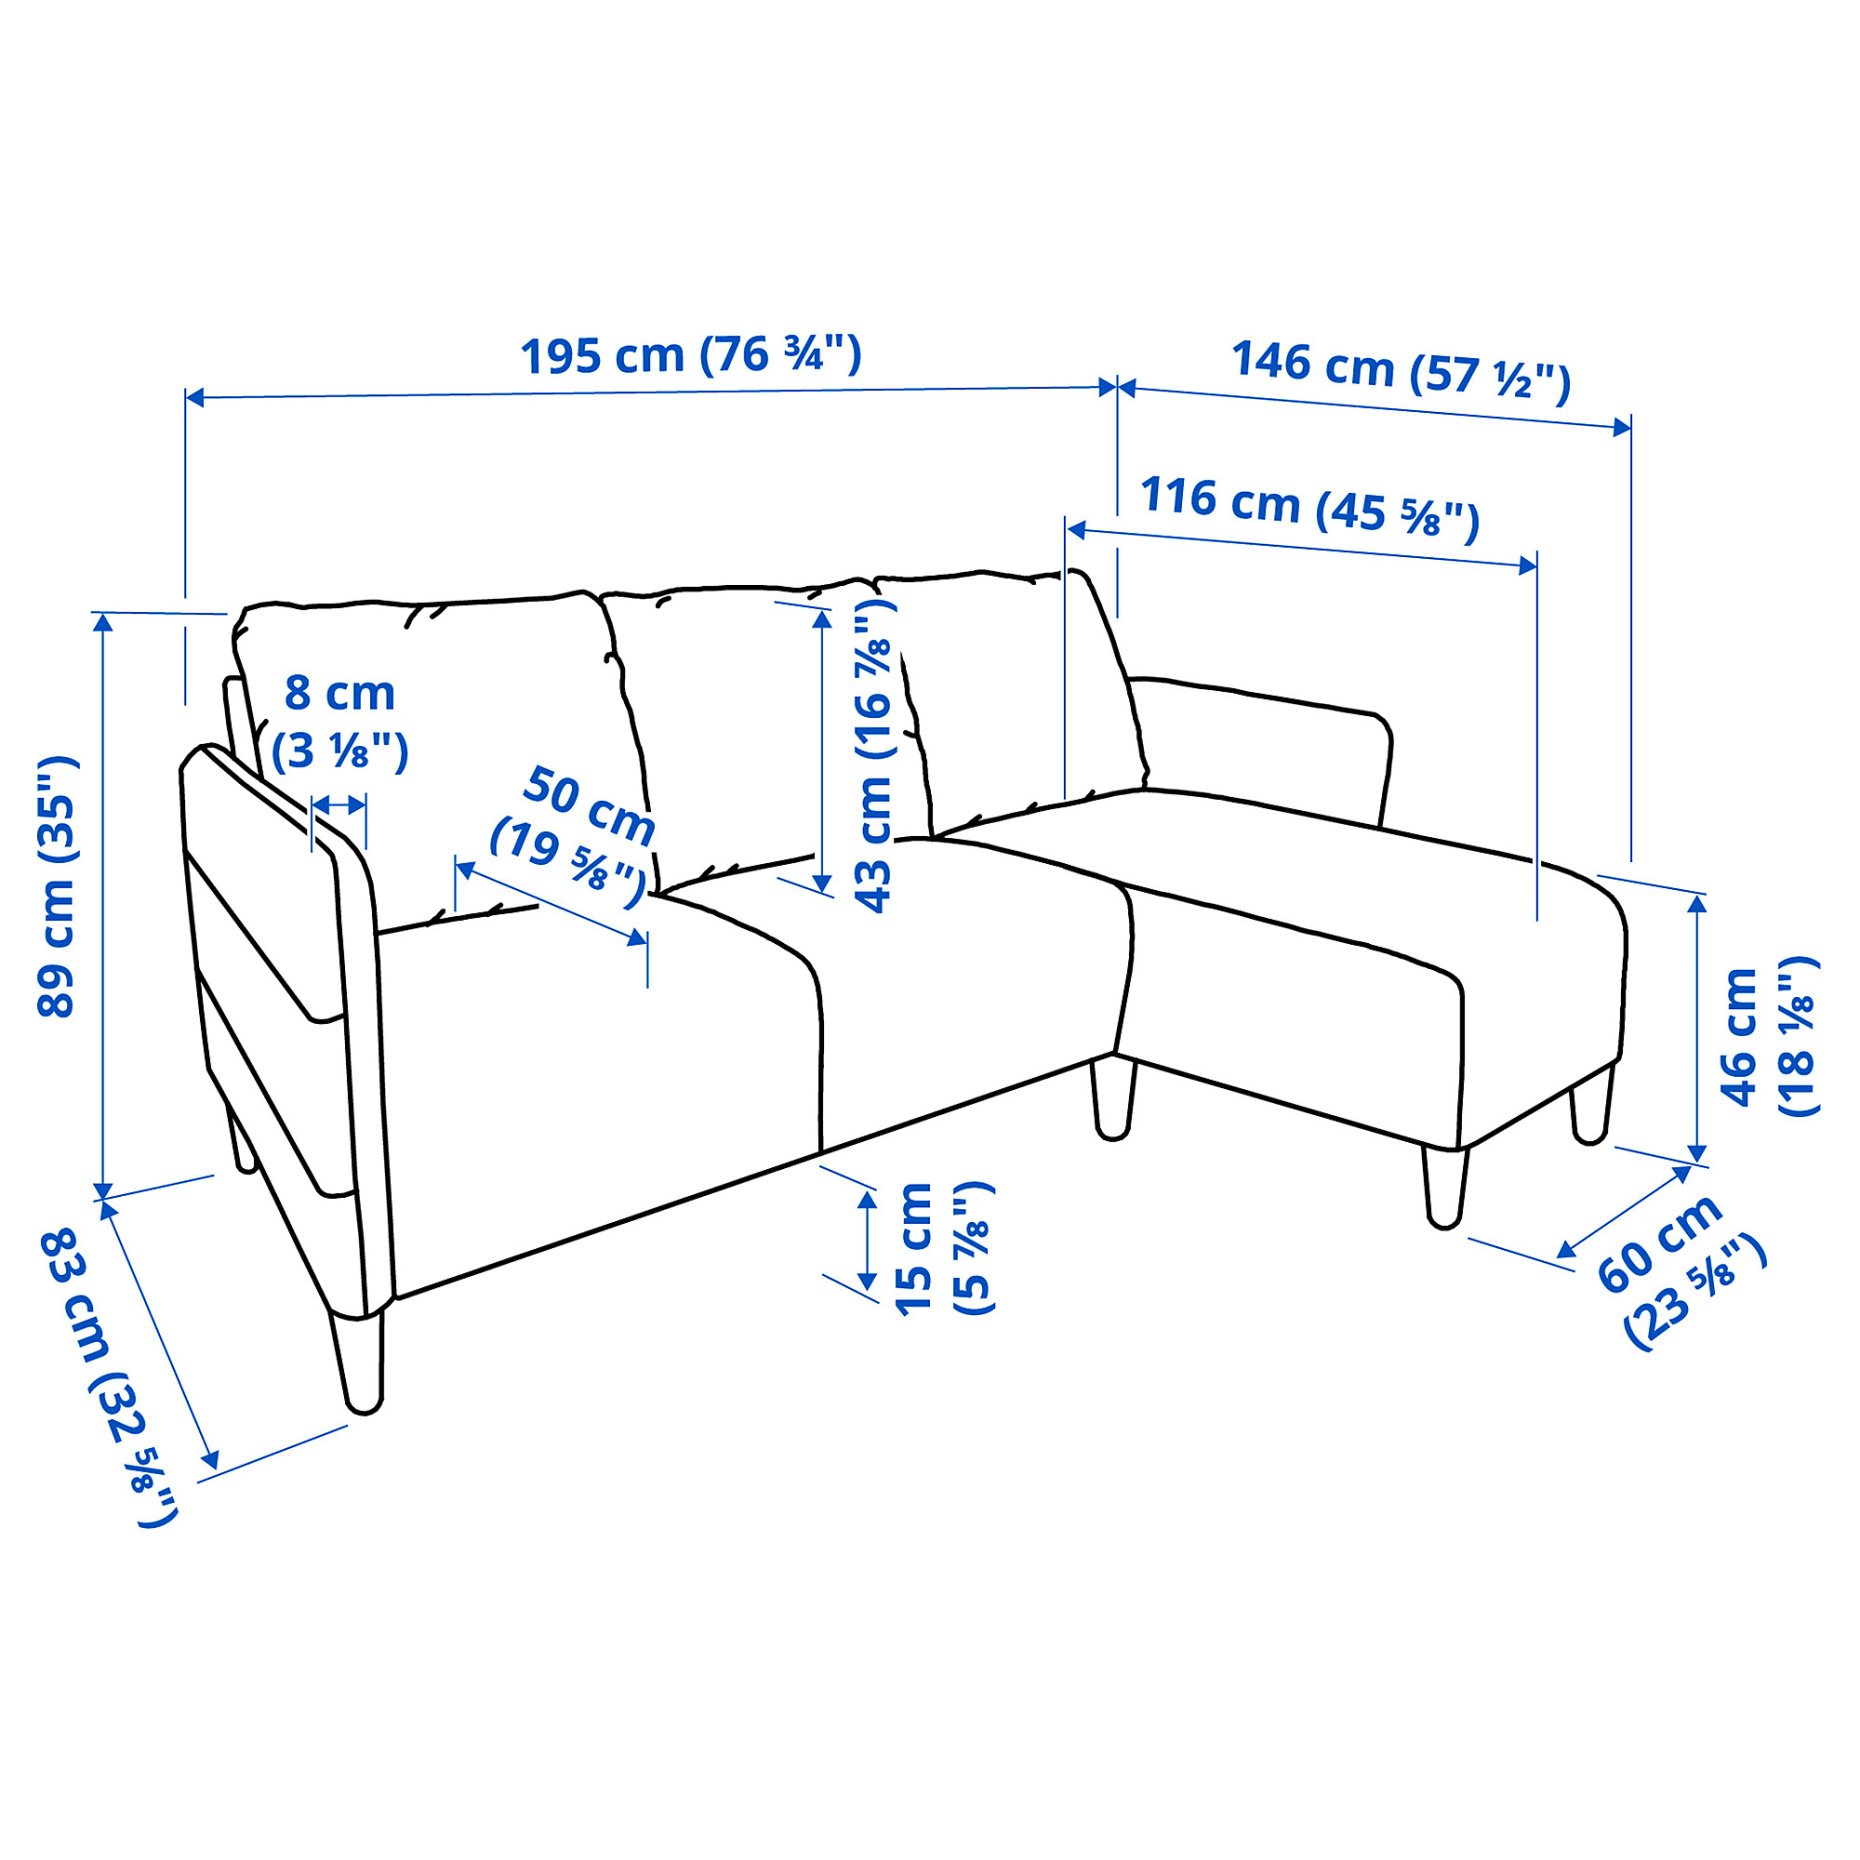 ANGERSBY, 3-seat sofa with chaise longue, 604.990.77